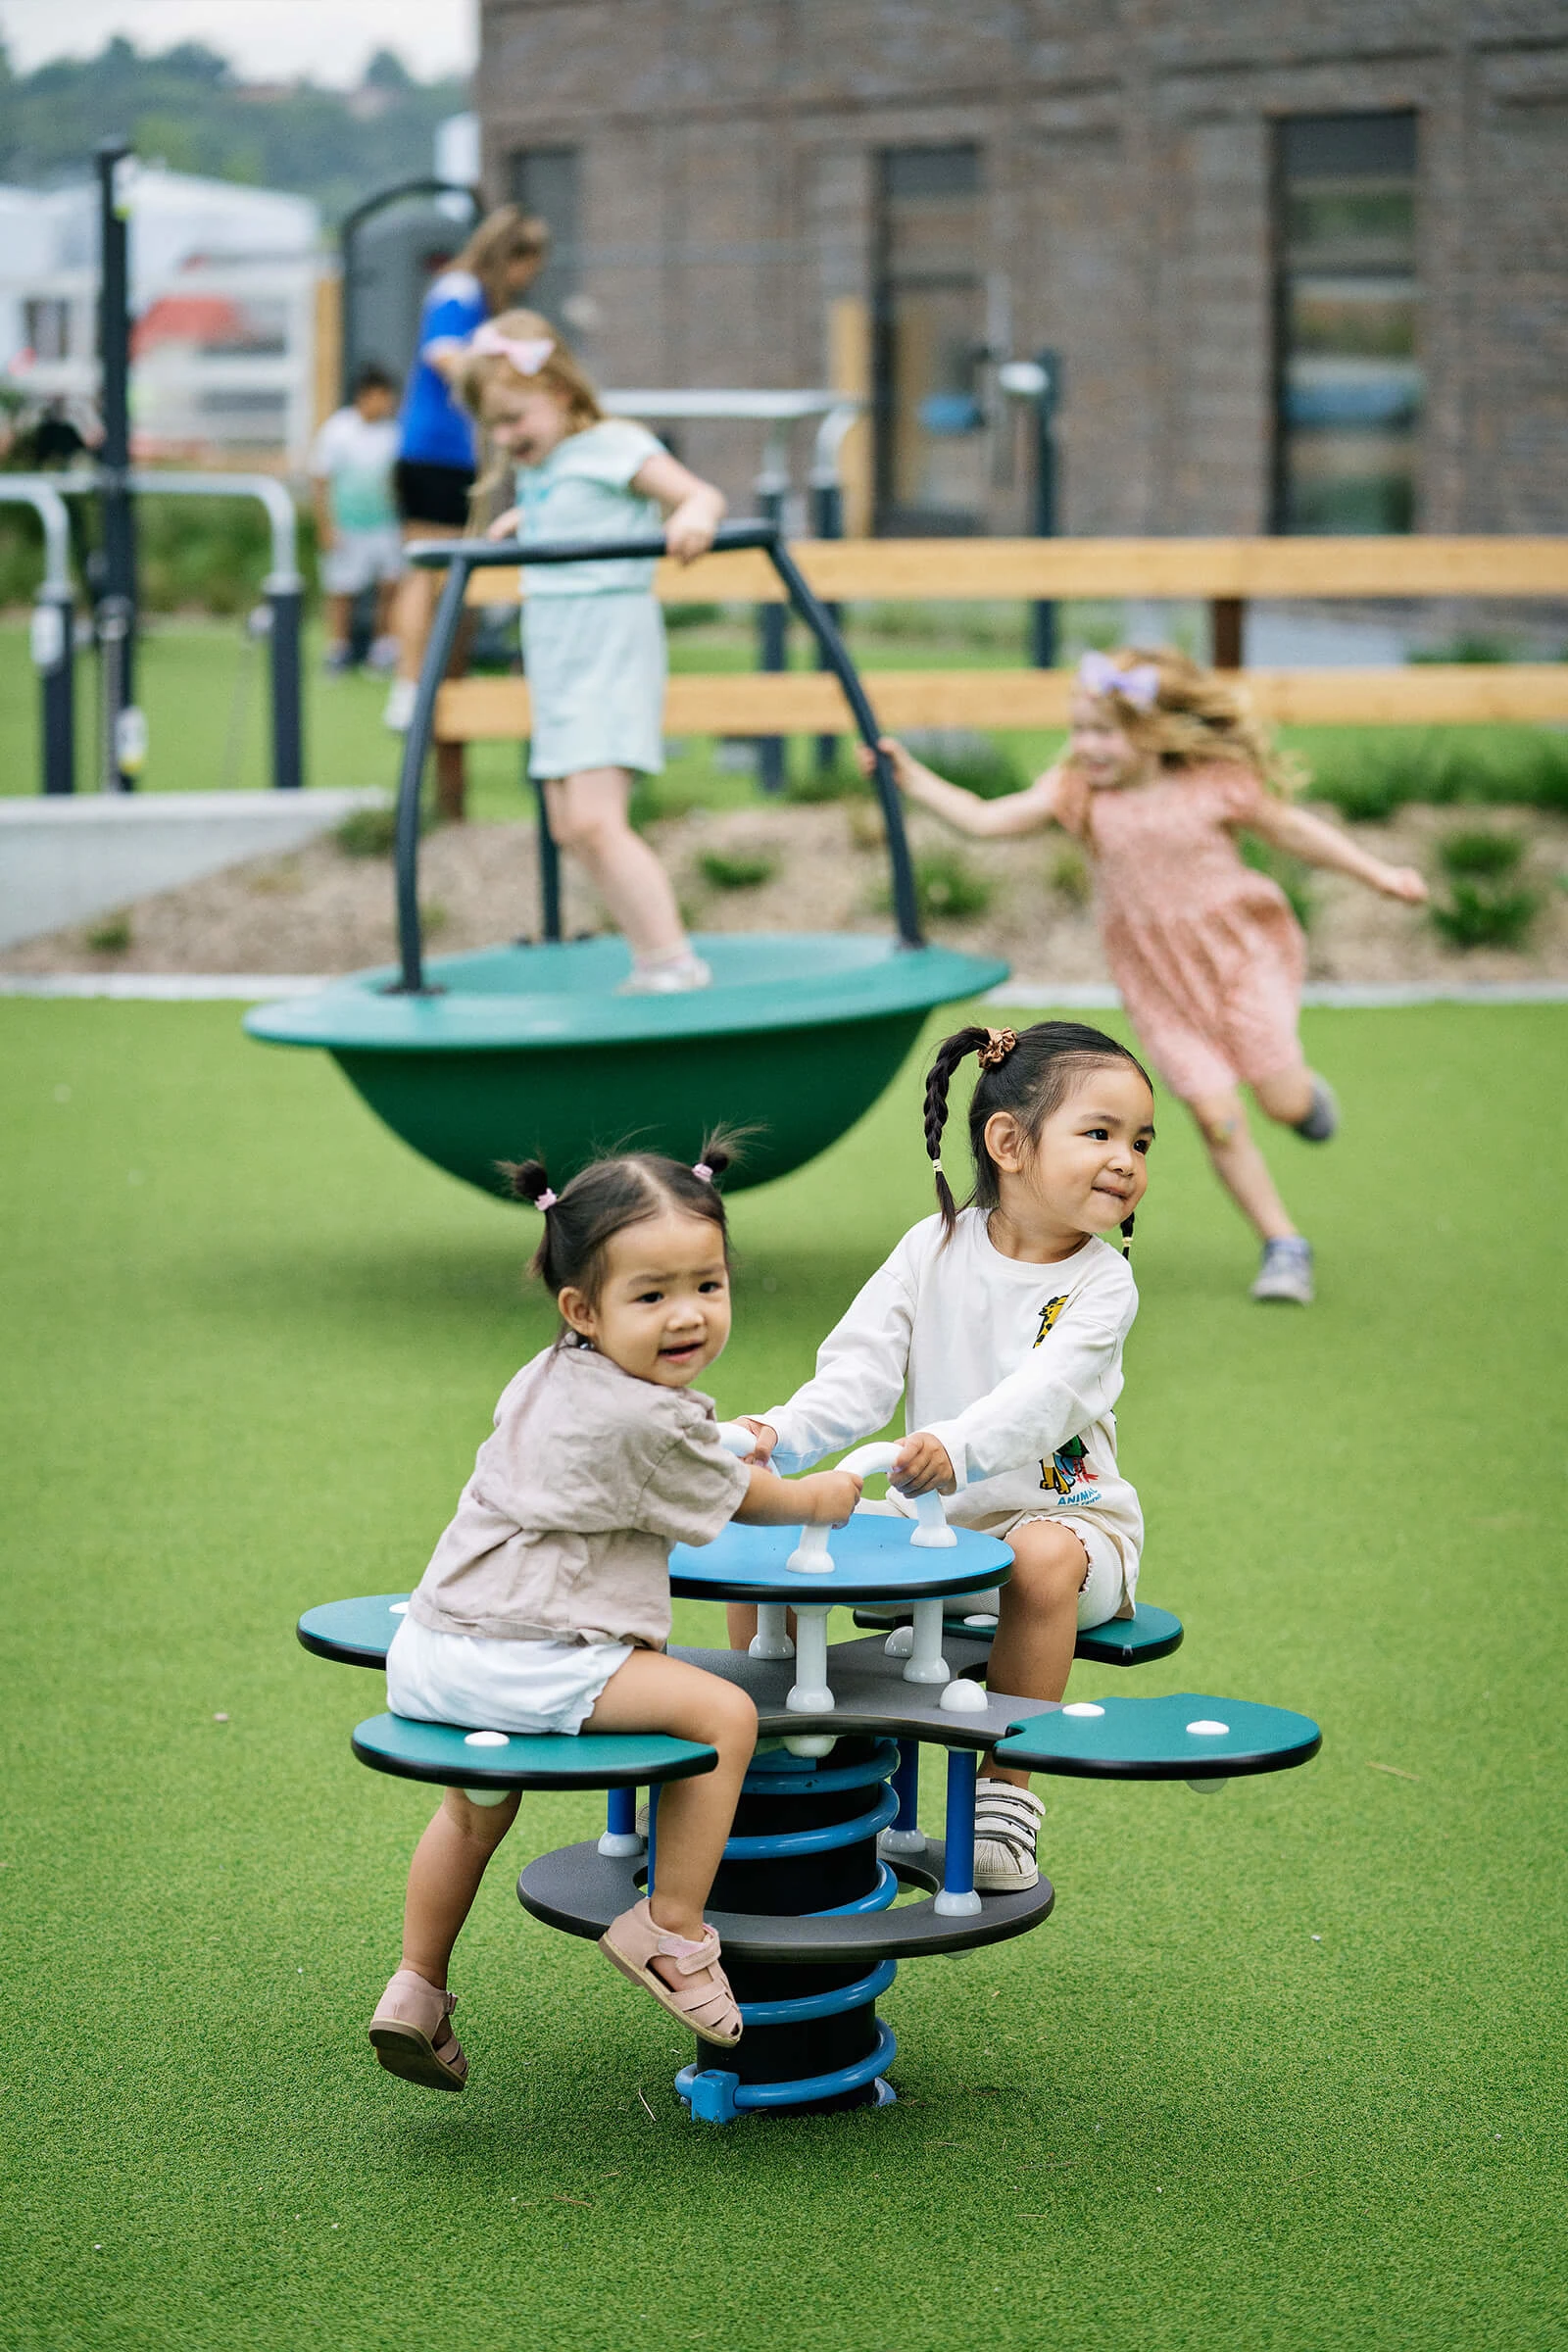 Two young girls playing on a green daisy springer with other young girls in the background on a tipi carousel. Creating zones within your playground layout plan can help younger children feel more confident to play.